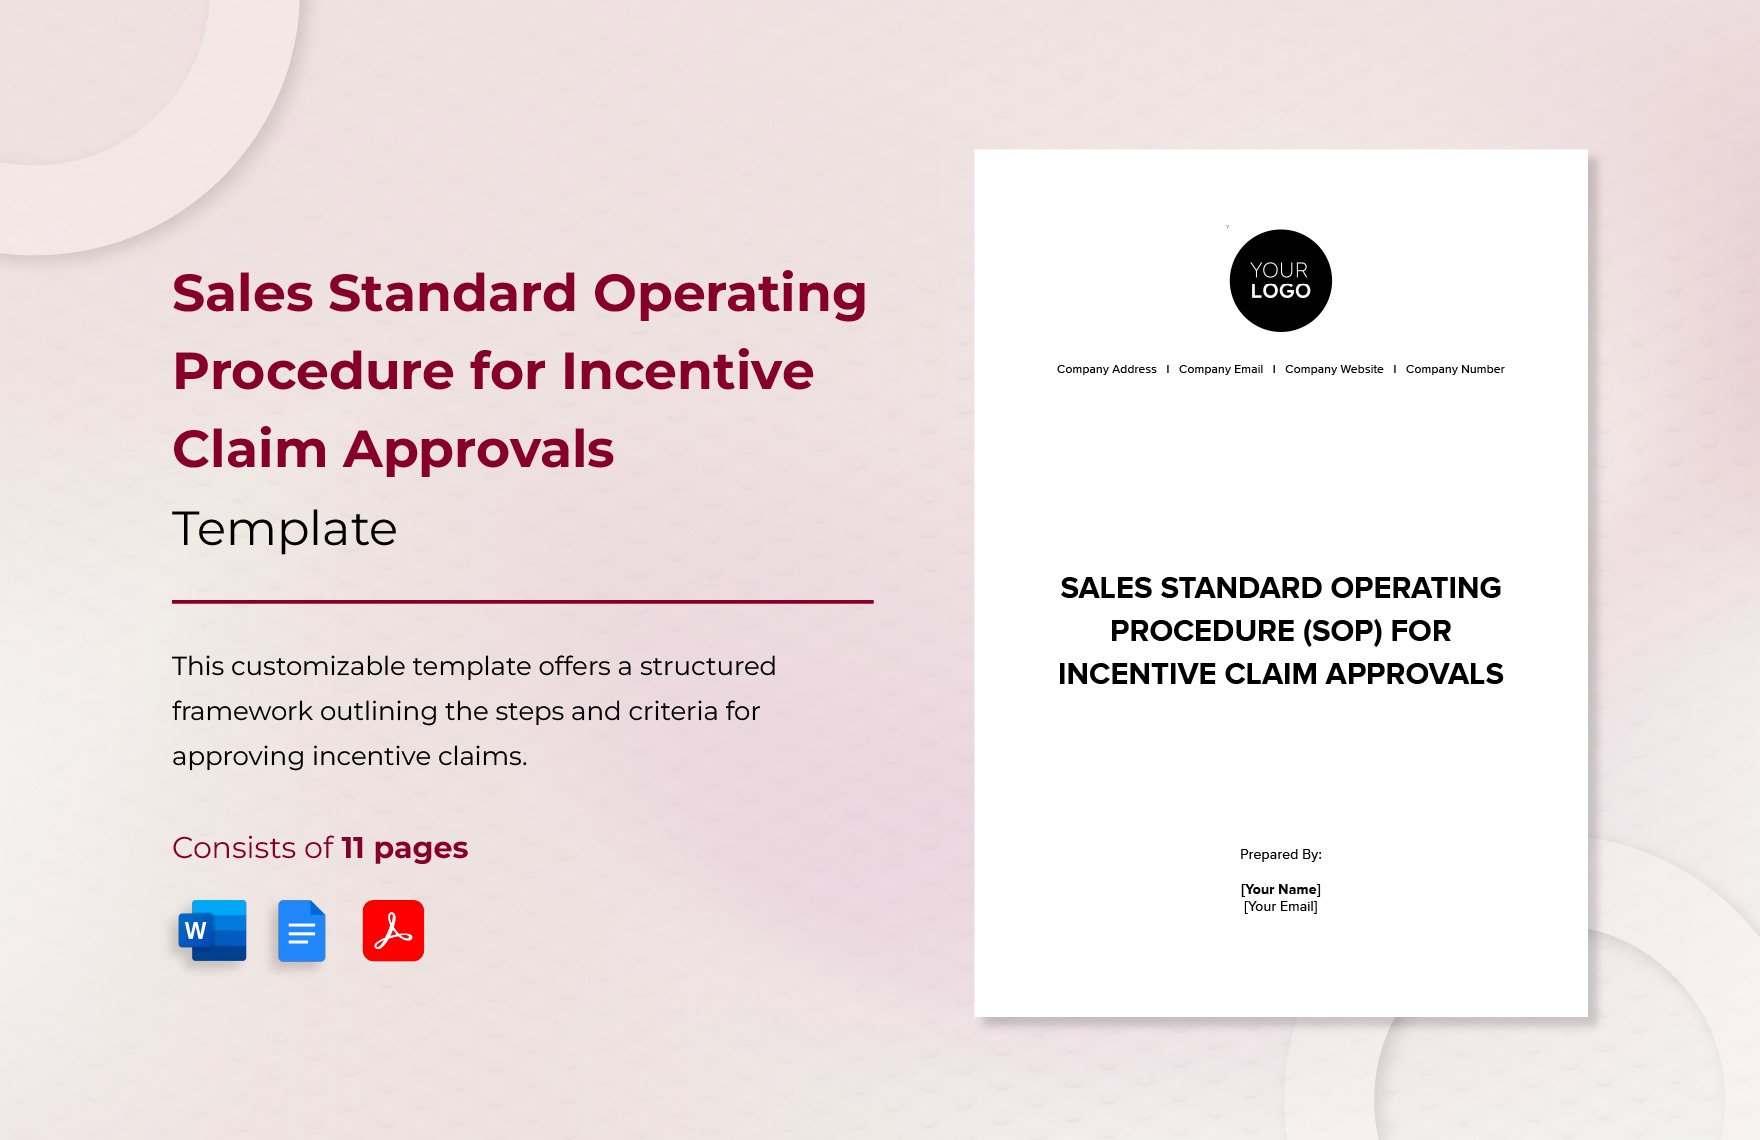 Sales Standard Operating Procedure (SOP) for Incentive Claim Approvals Template